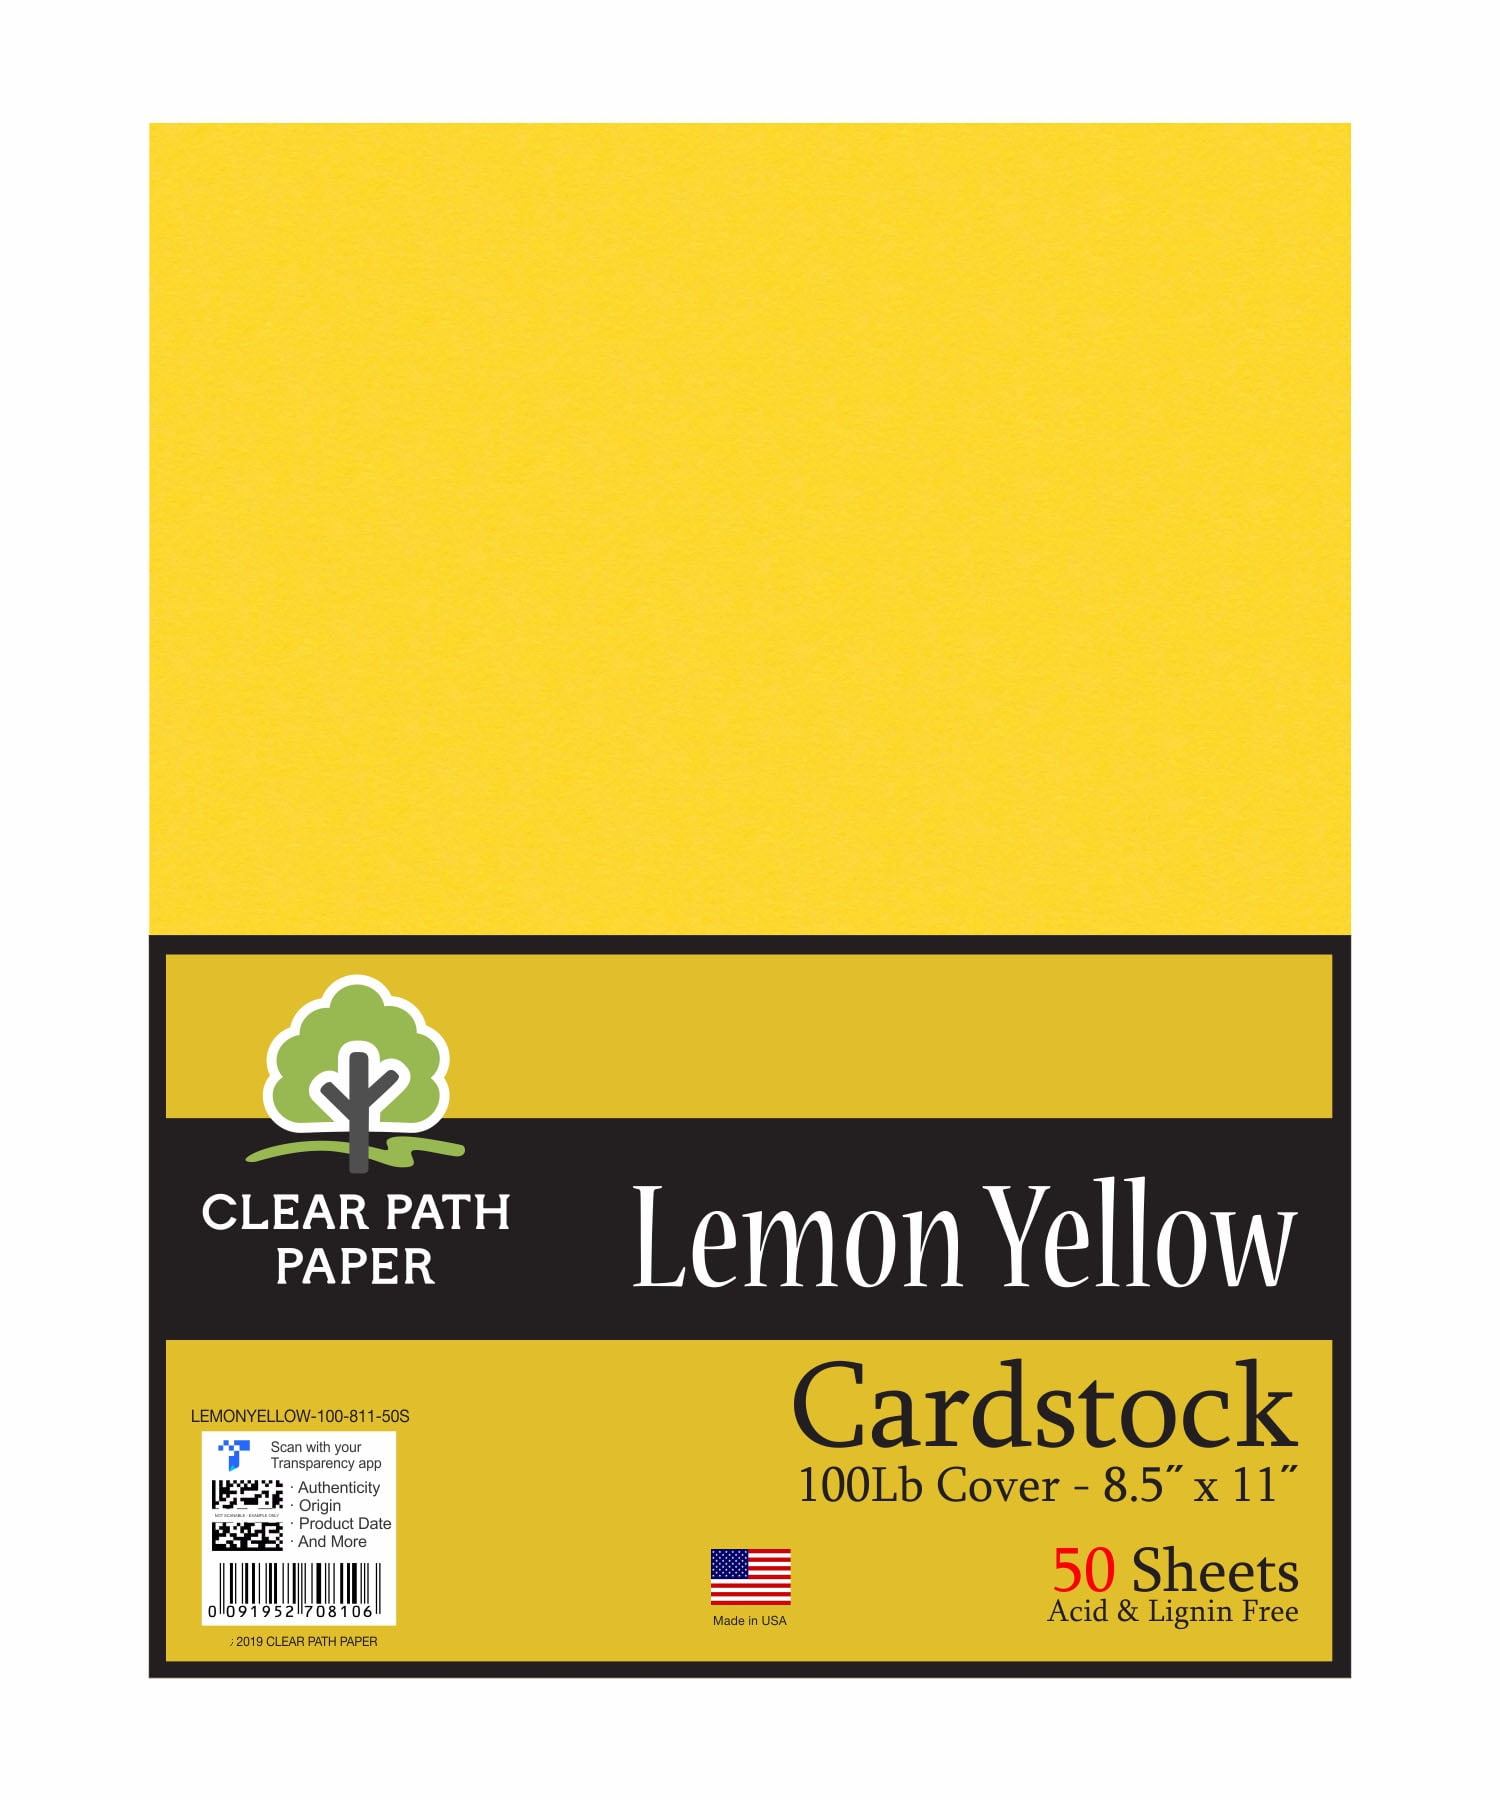 Lemon Yellow Cardstock - 8.5 x 11 inch - 100Lb Cover - 50 Sheets - Clear  Path Paper 